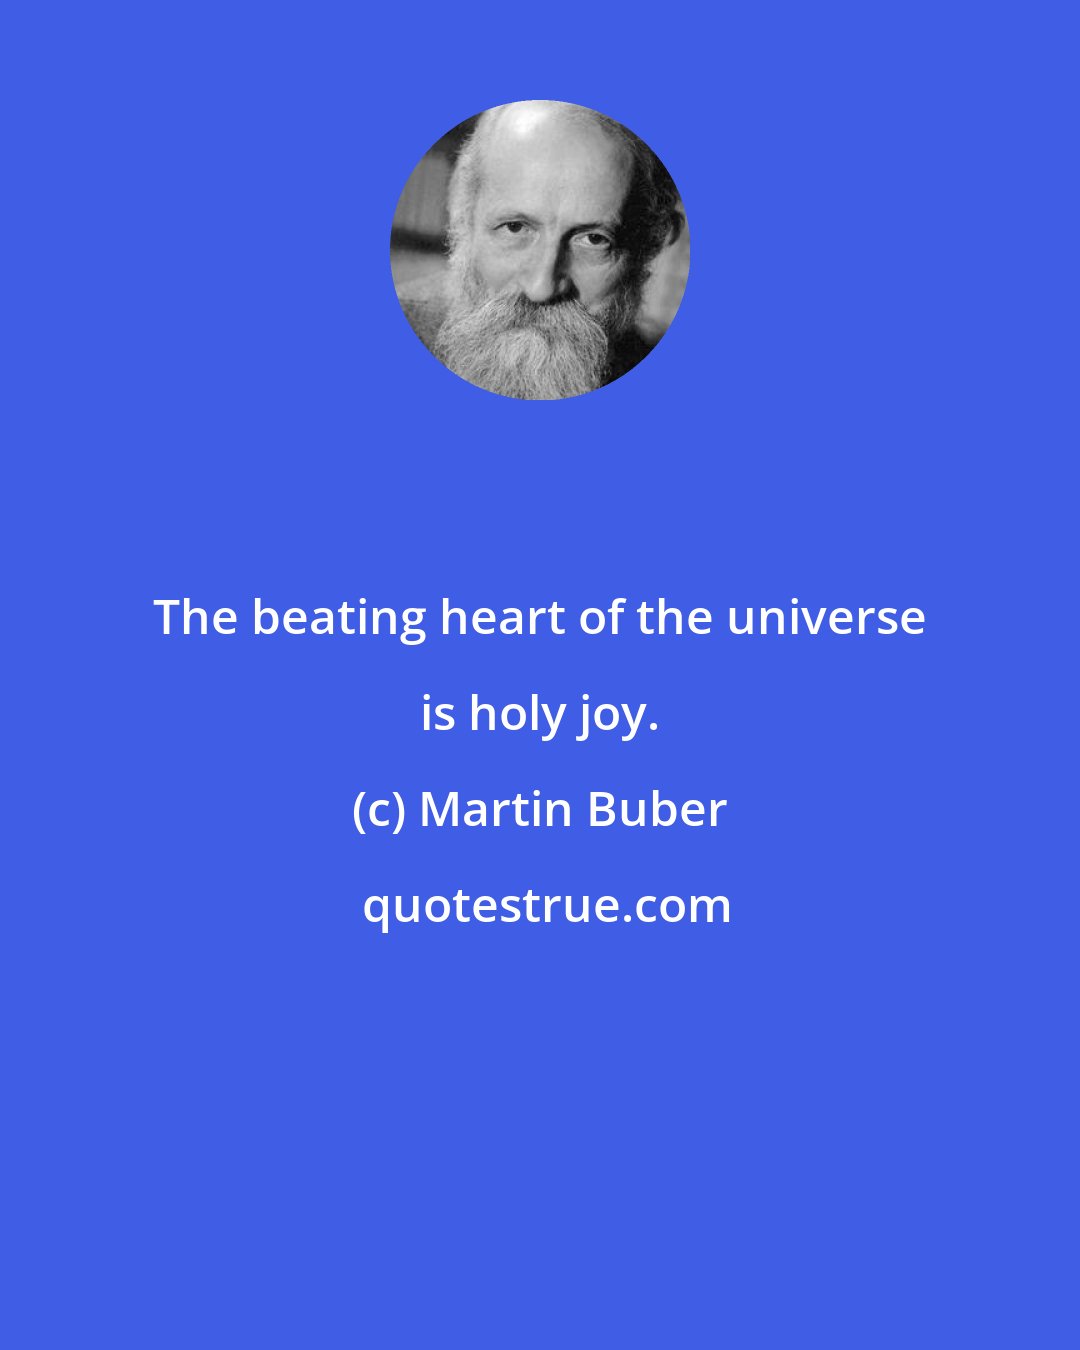 Martin Buber: The beating heart of the universe is holy joy.